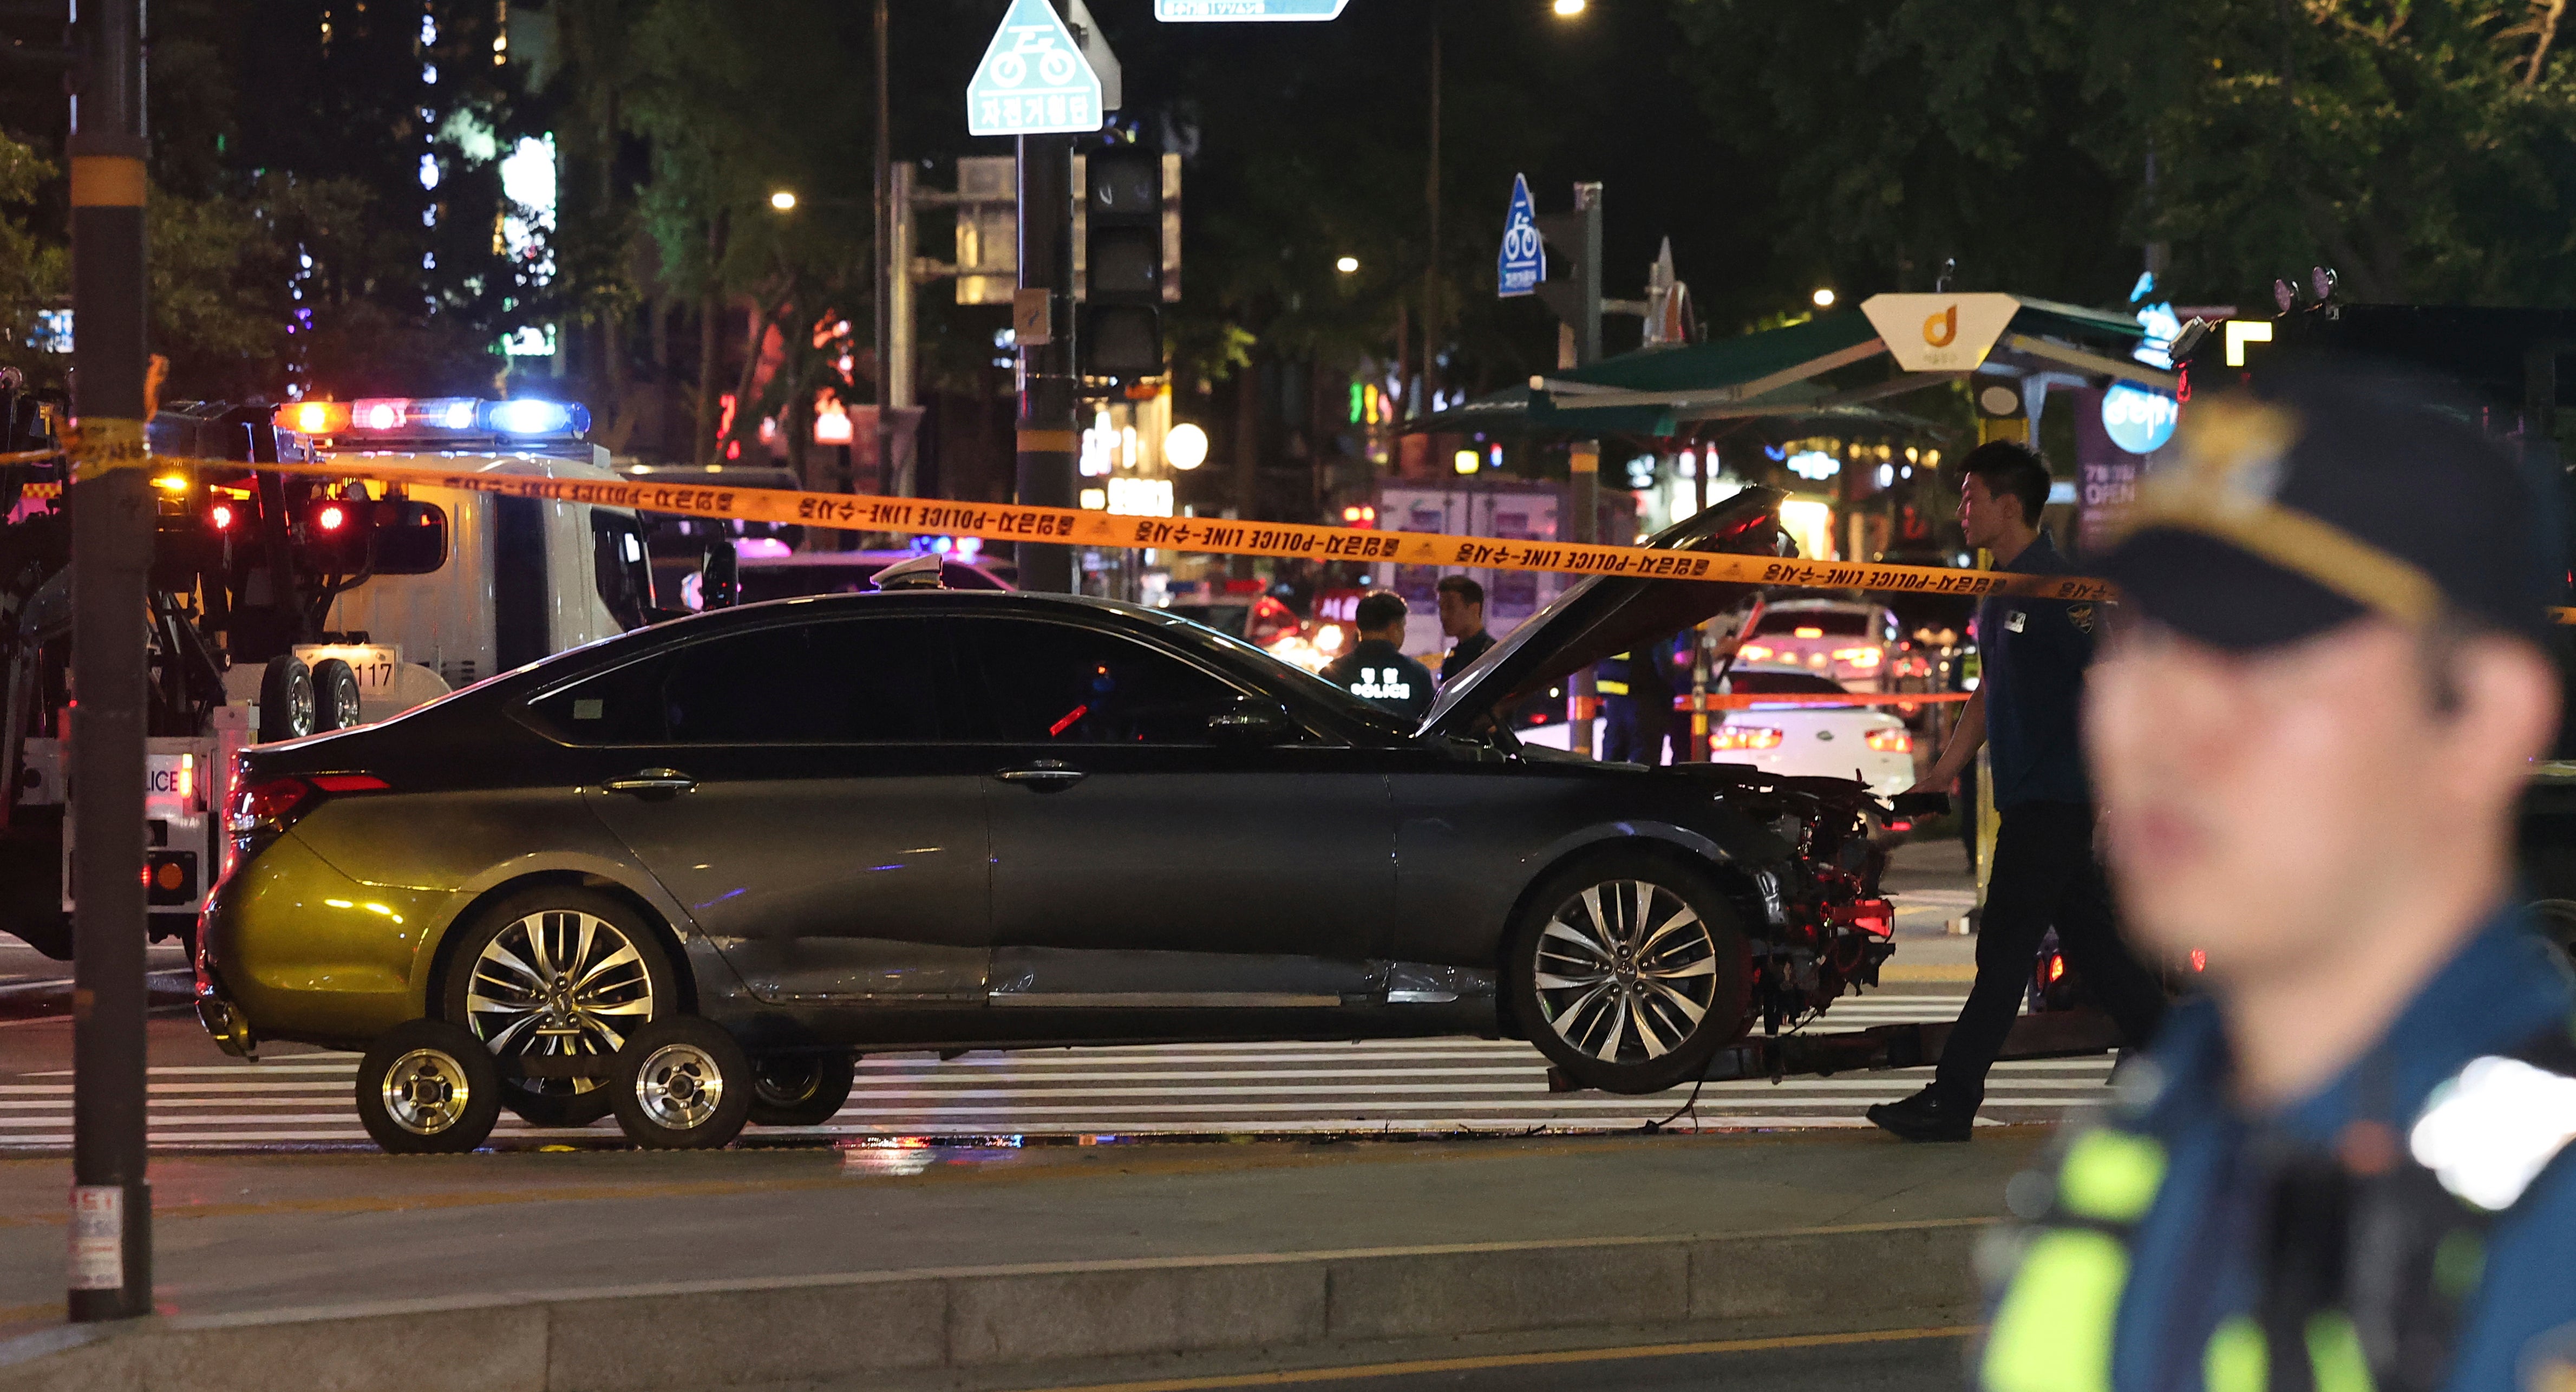 Police officers control a car accident scene near Seoul City Hall in downtown Seoul, South Korea, Monday